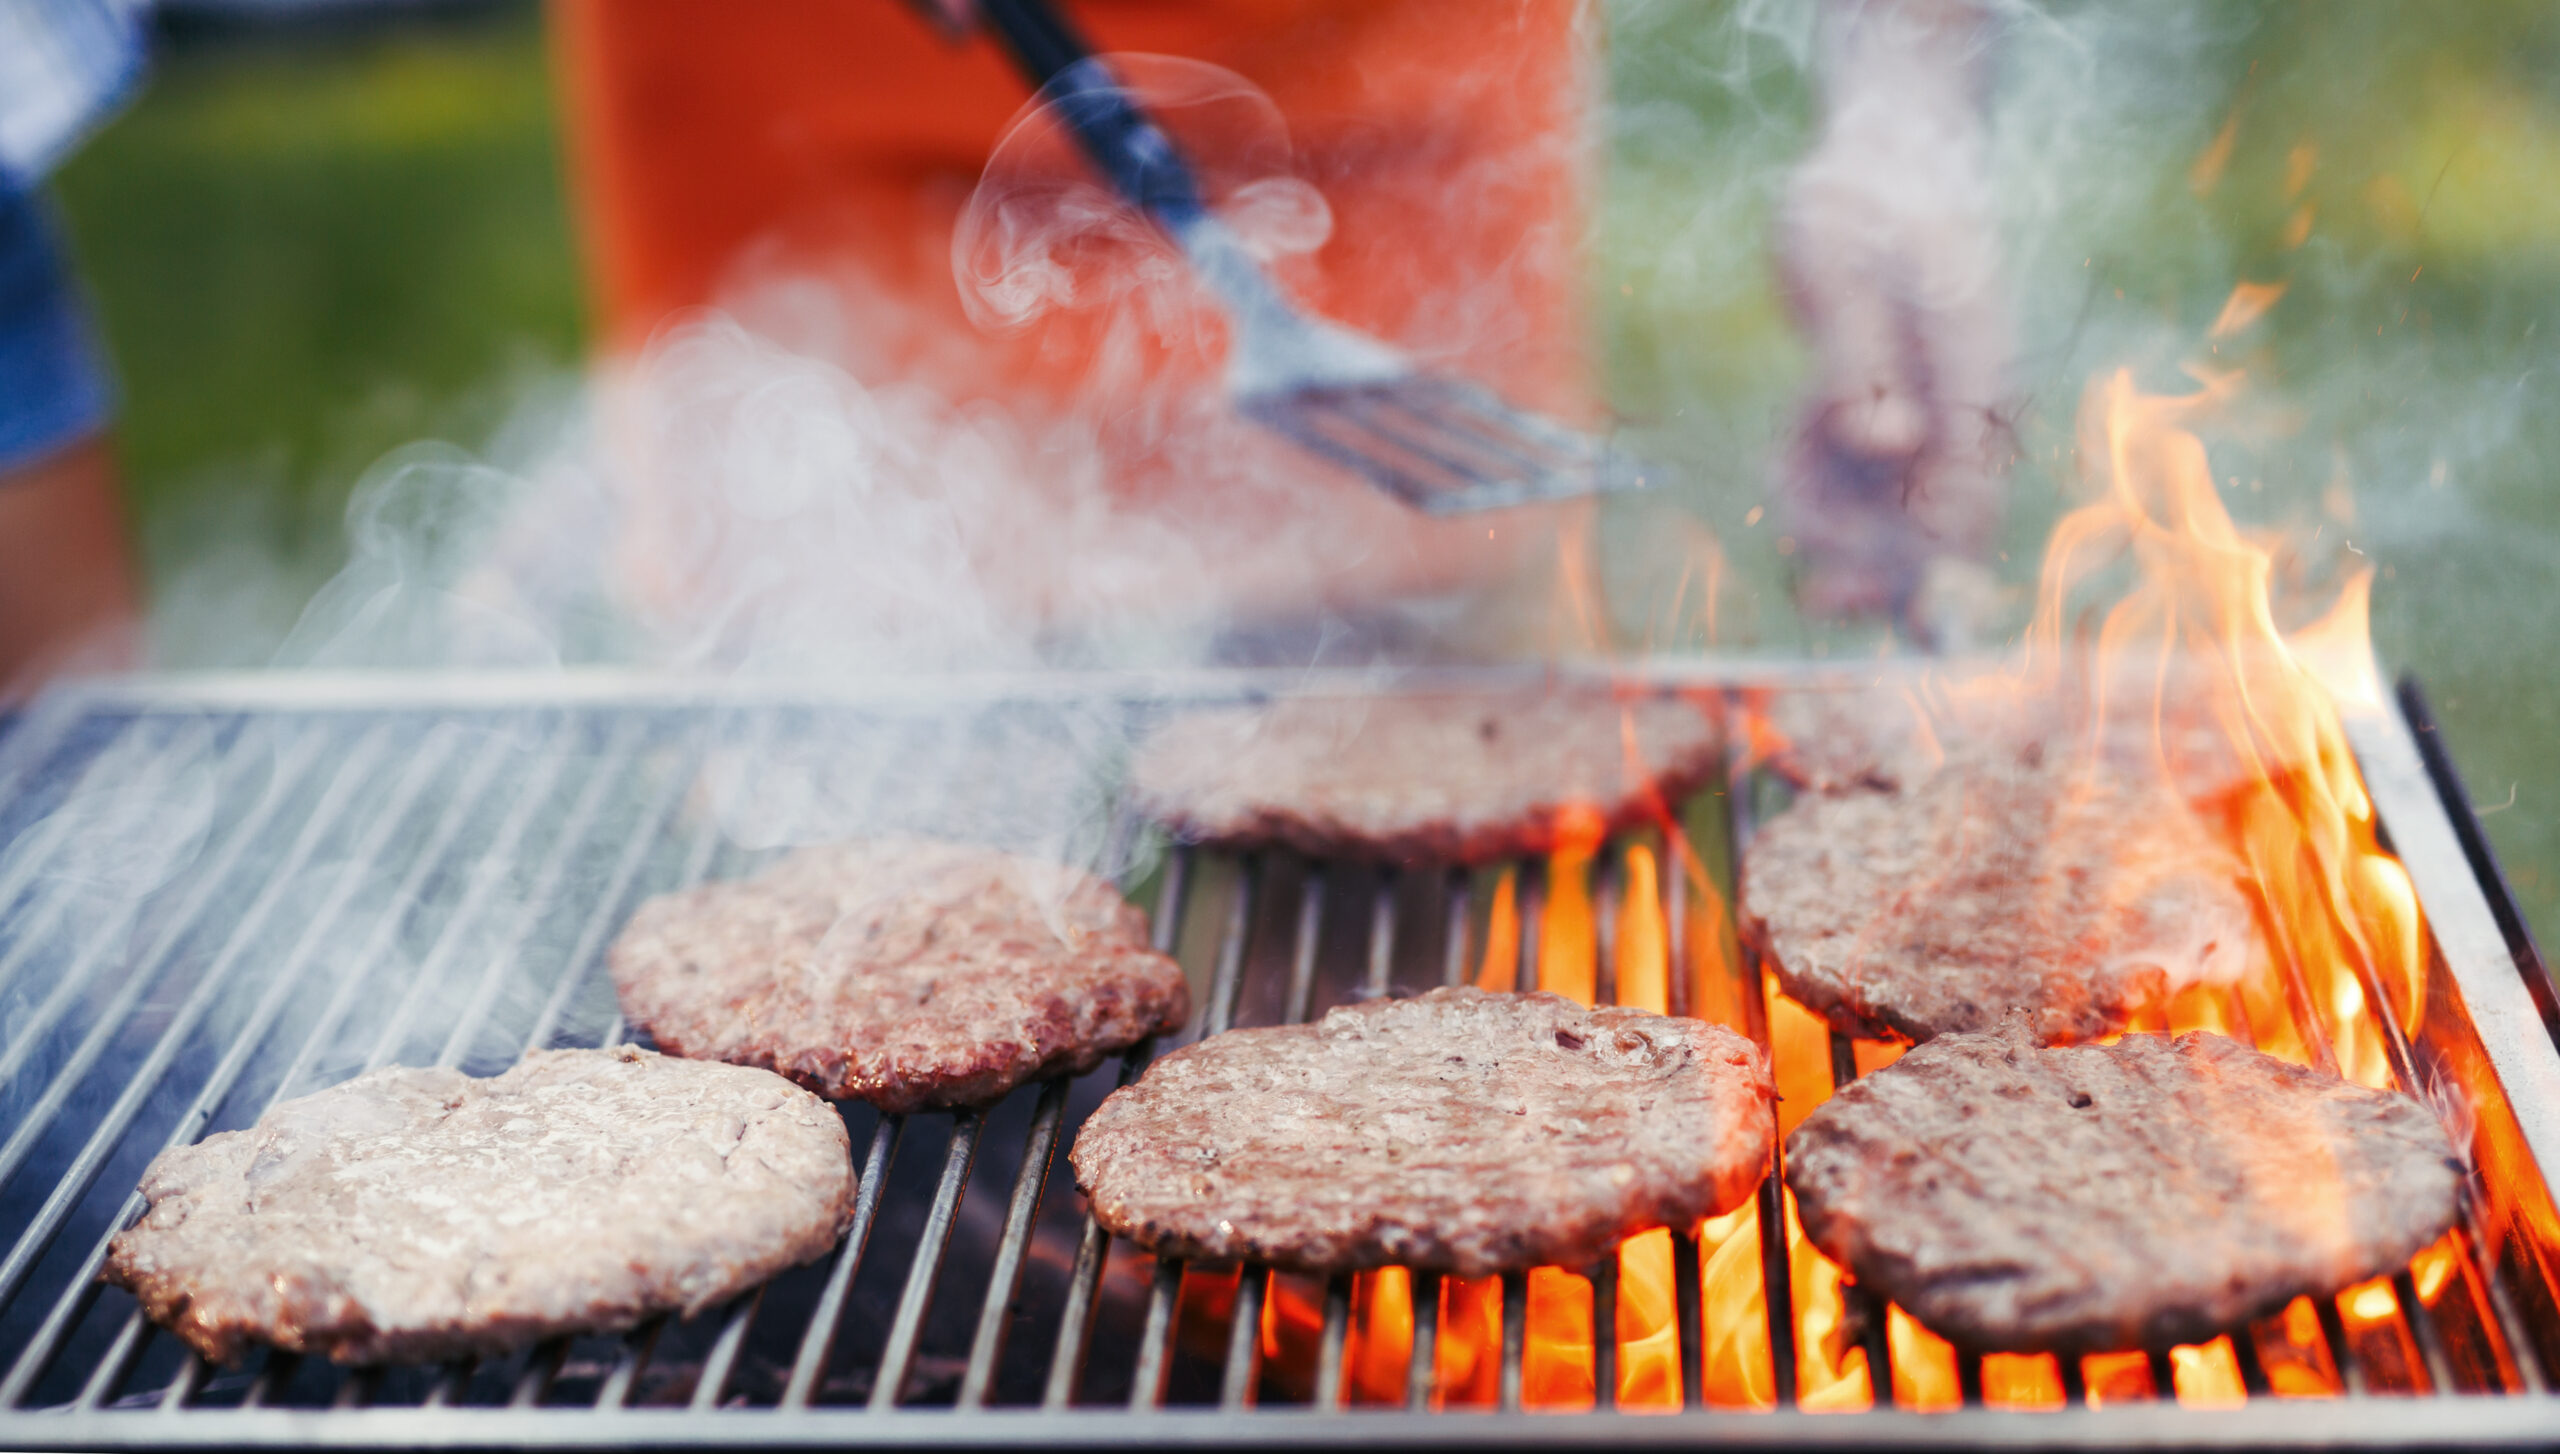 picture of delicious burgers grilled on barbecue 2021 08 26 17 30 18 utc scaled